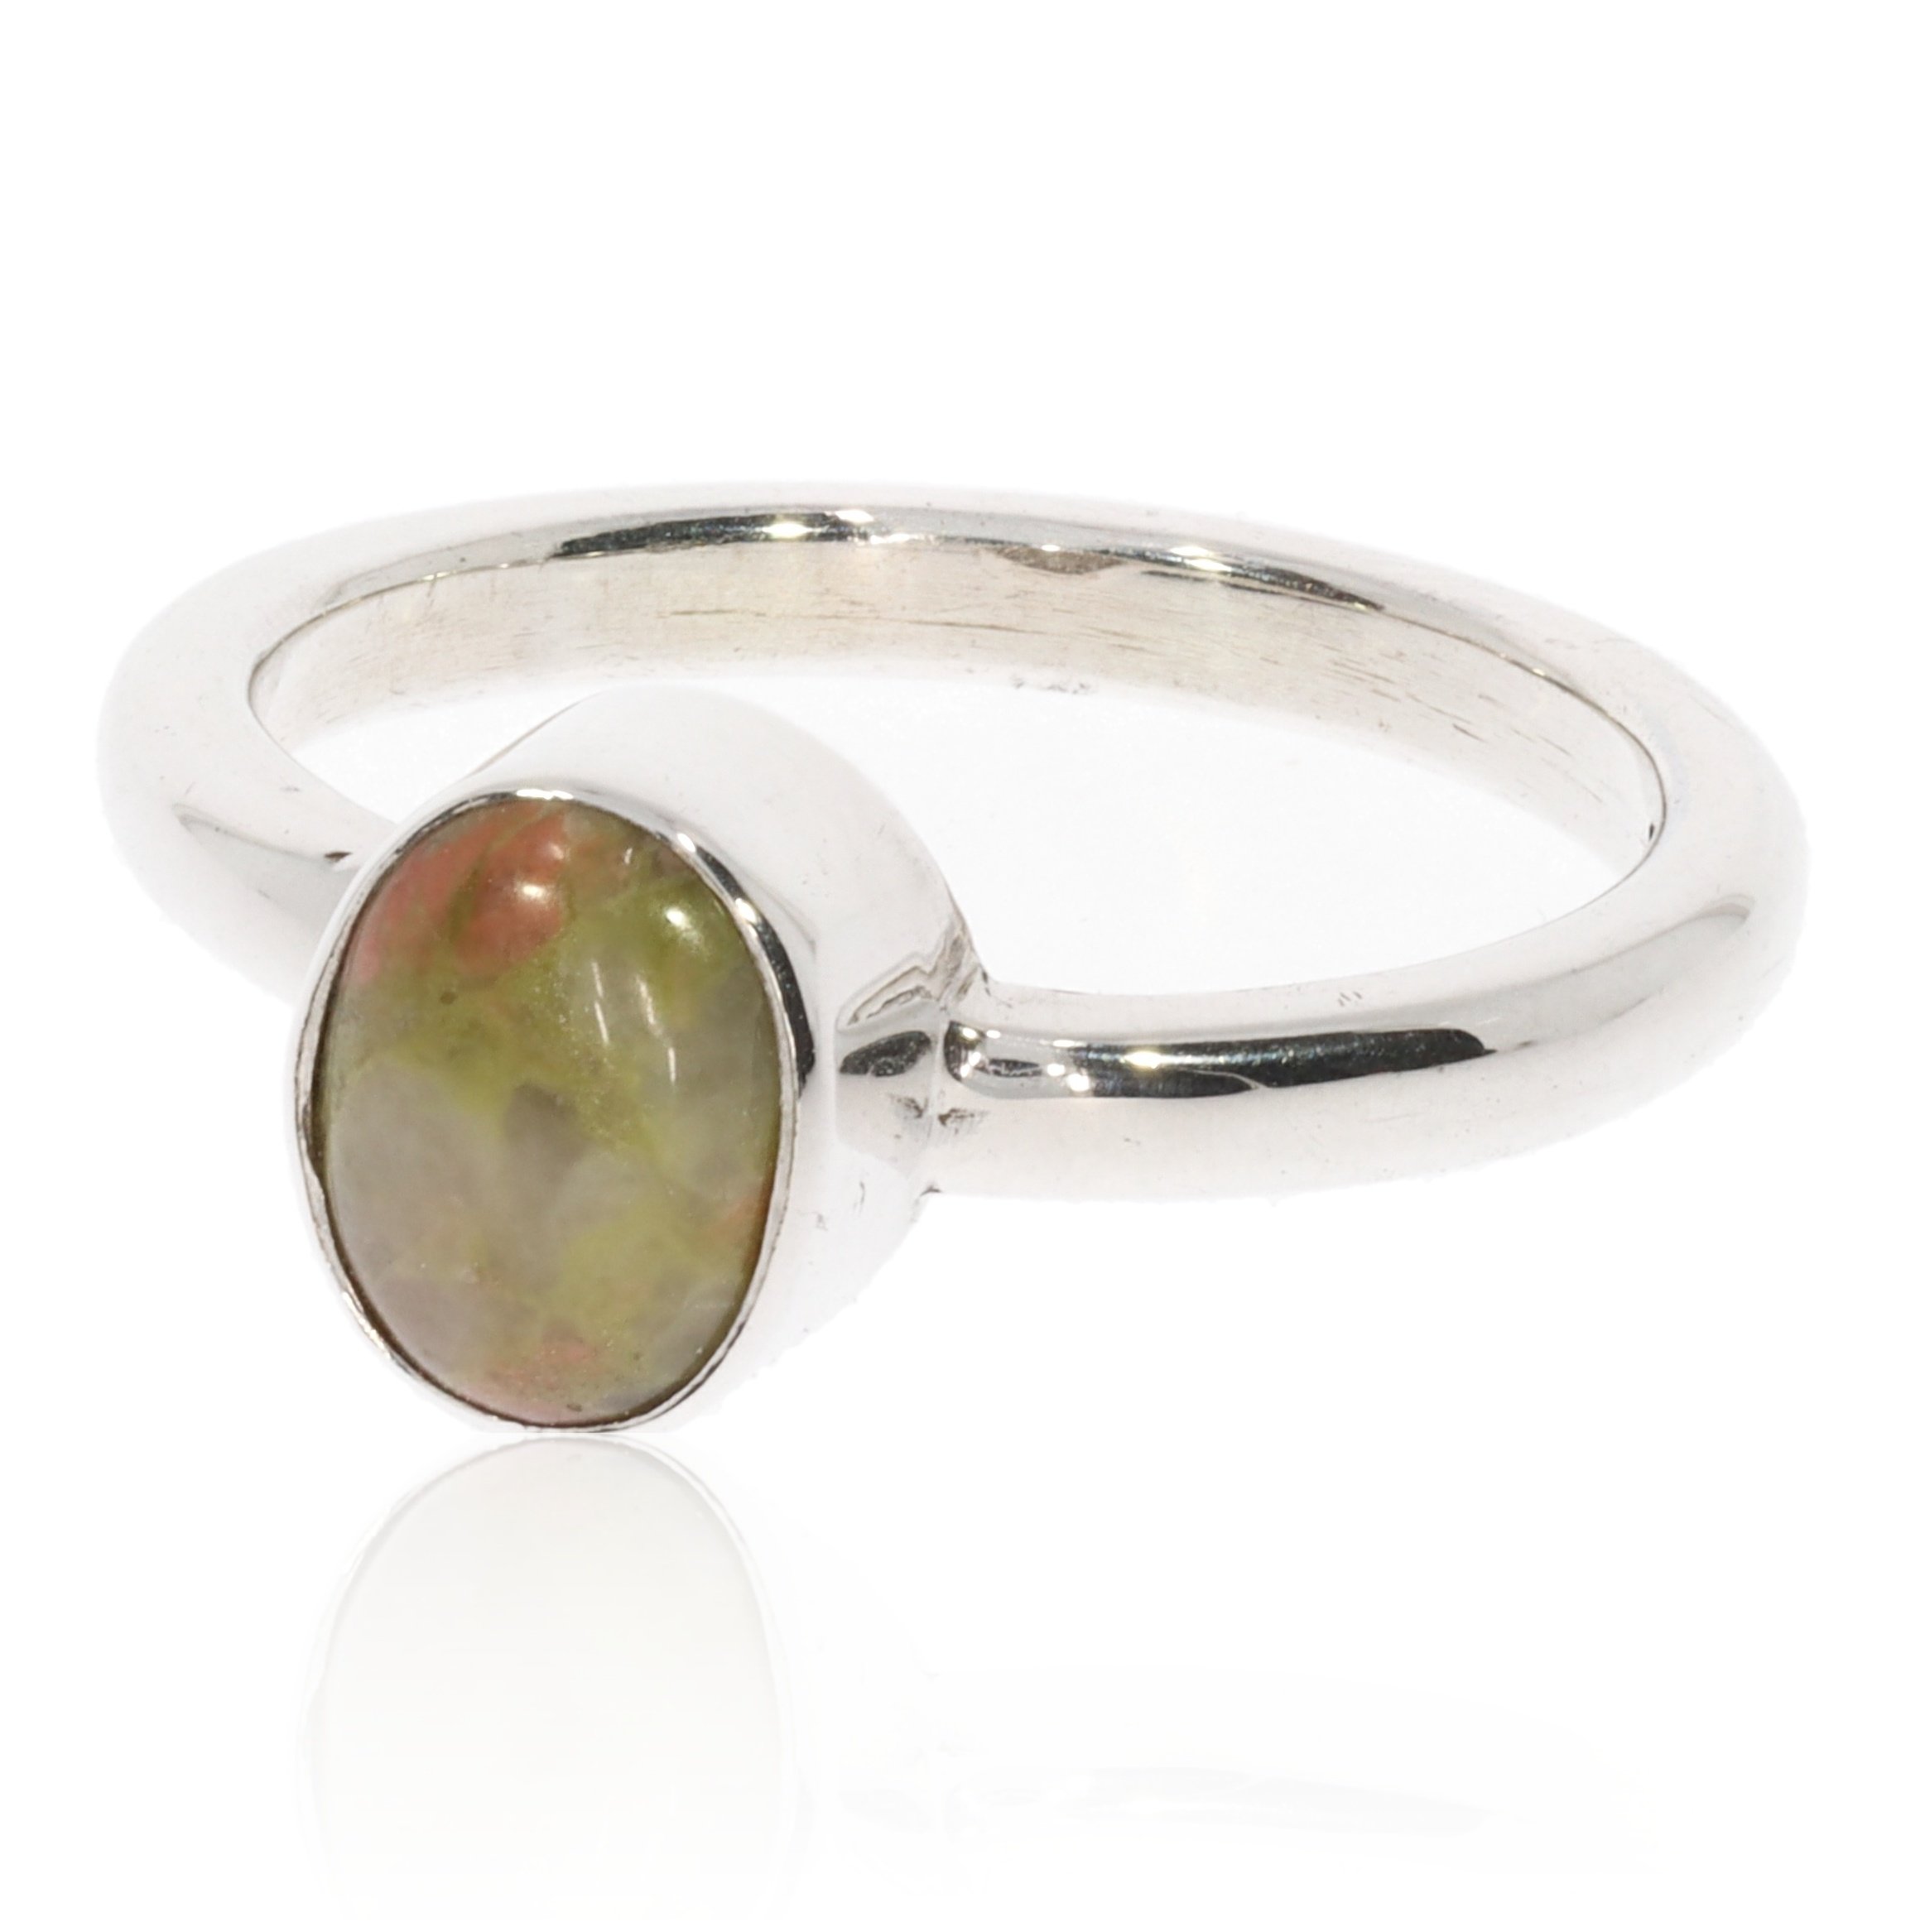 Unusual Unakite and Silver Ring